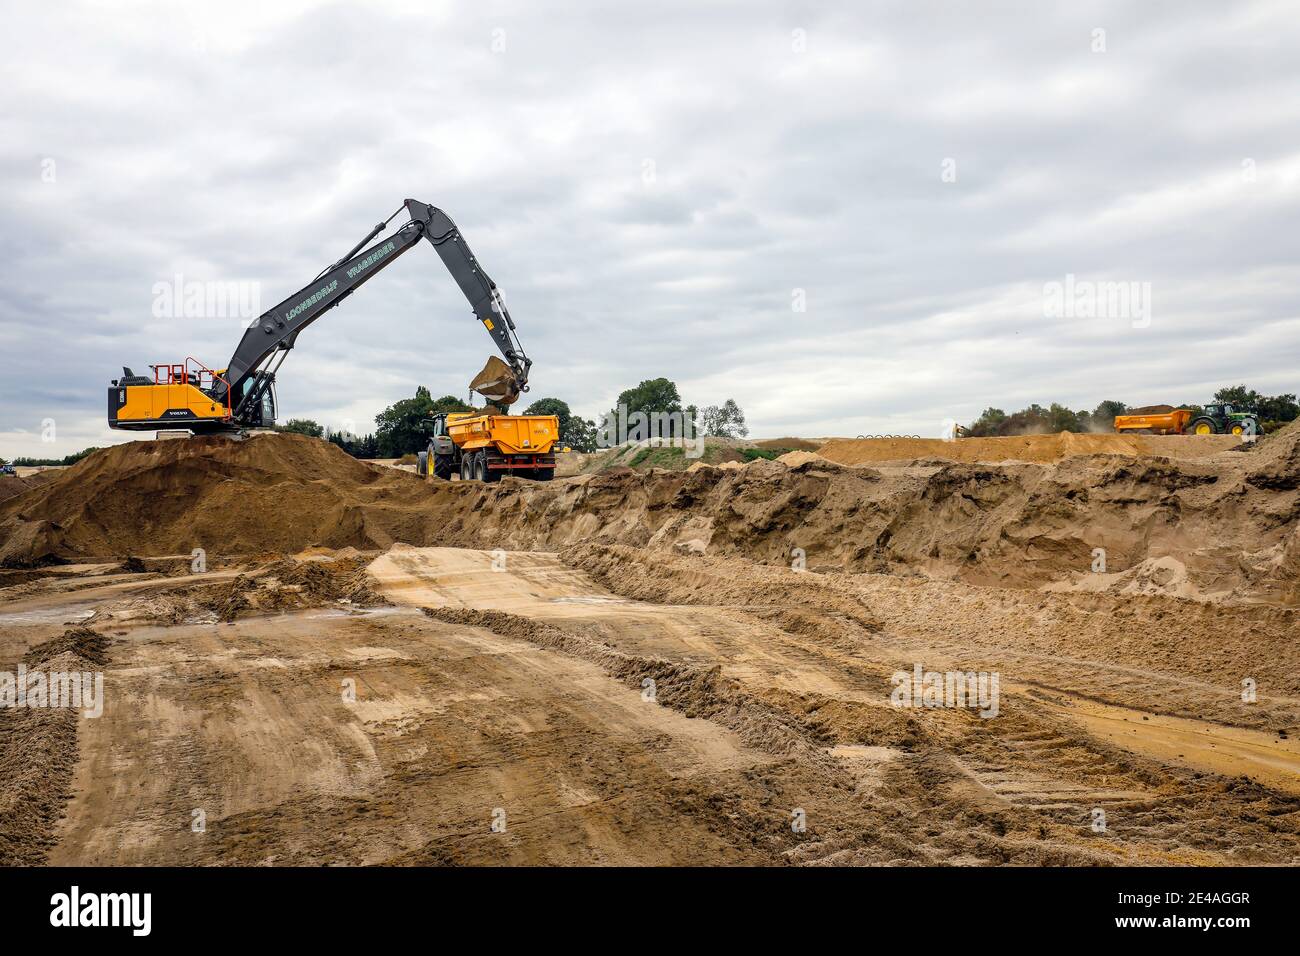 Oberhausen, Ruhr area, North Rhine-Westphalia, Germany - Excavator during earthworks as part of the Emscher conversion, new construction of the Emsche Stock Photo